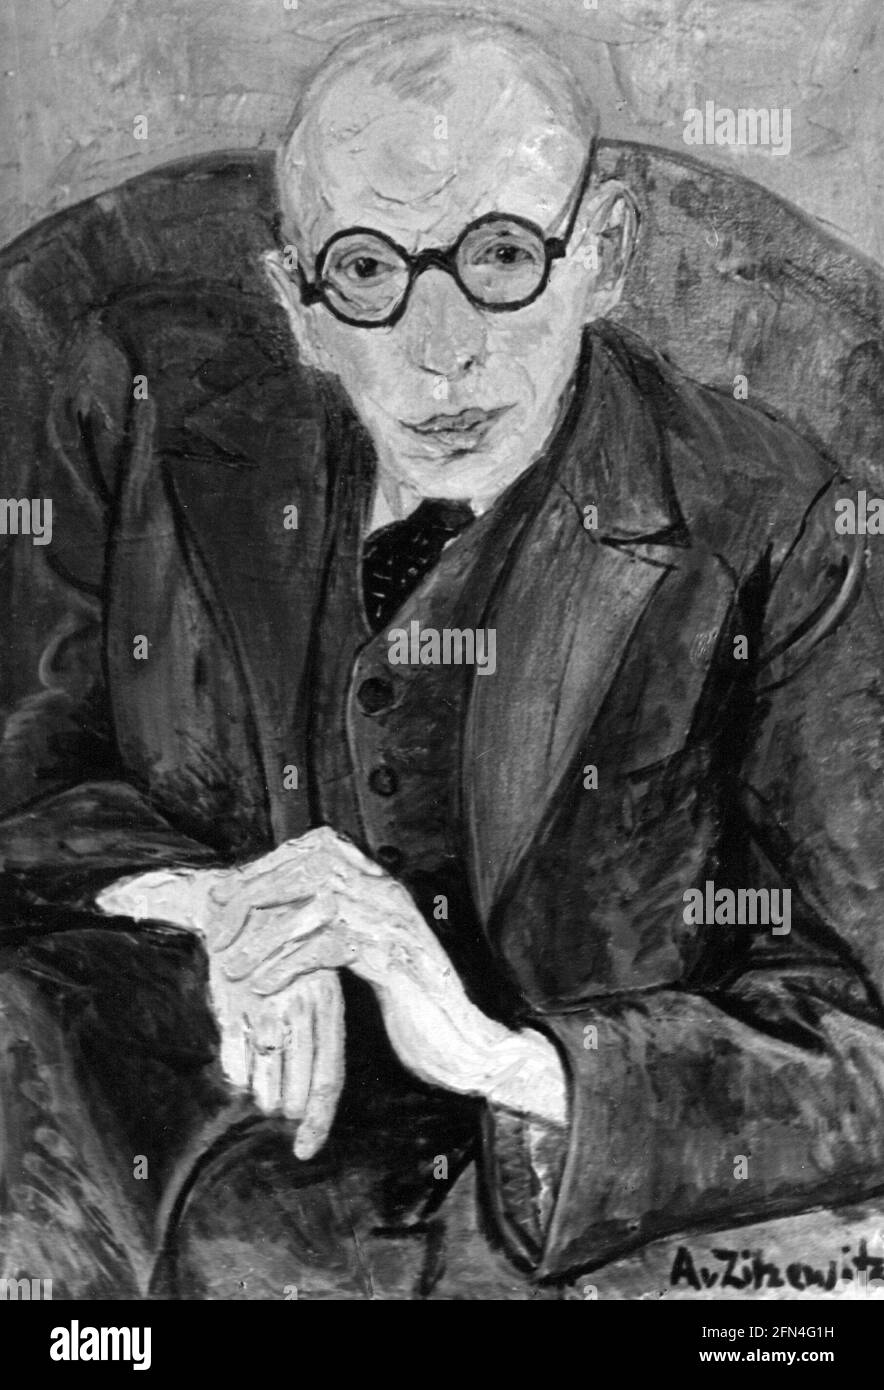 Herrmann-Neisse, Max, 23.5.1886 - 8.4.1941, German author / writer, half length with glasses, ADDITIONAL-RIGHTS-CLEARANCE-INFO-NOT-AVAILABLE Stock Photo